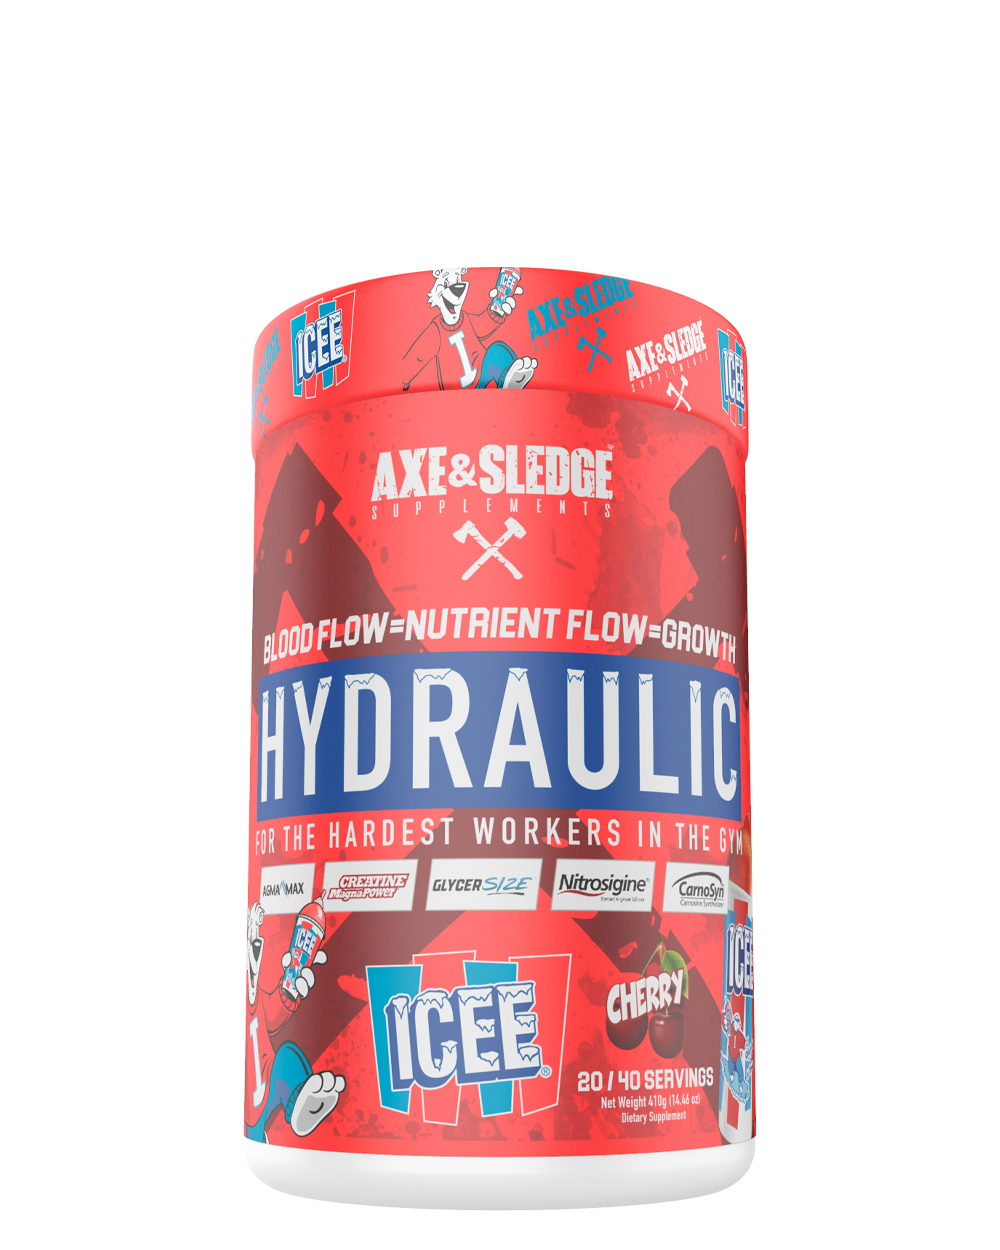 Axe and Sledge Hydraulic Pre-Pump, Size: 20/40 Servings, Flavor: ICEE Cherry